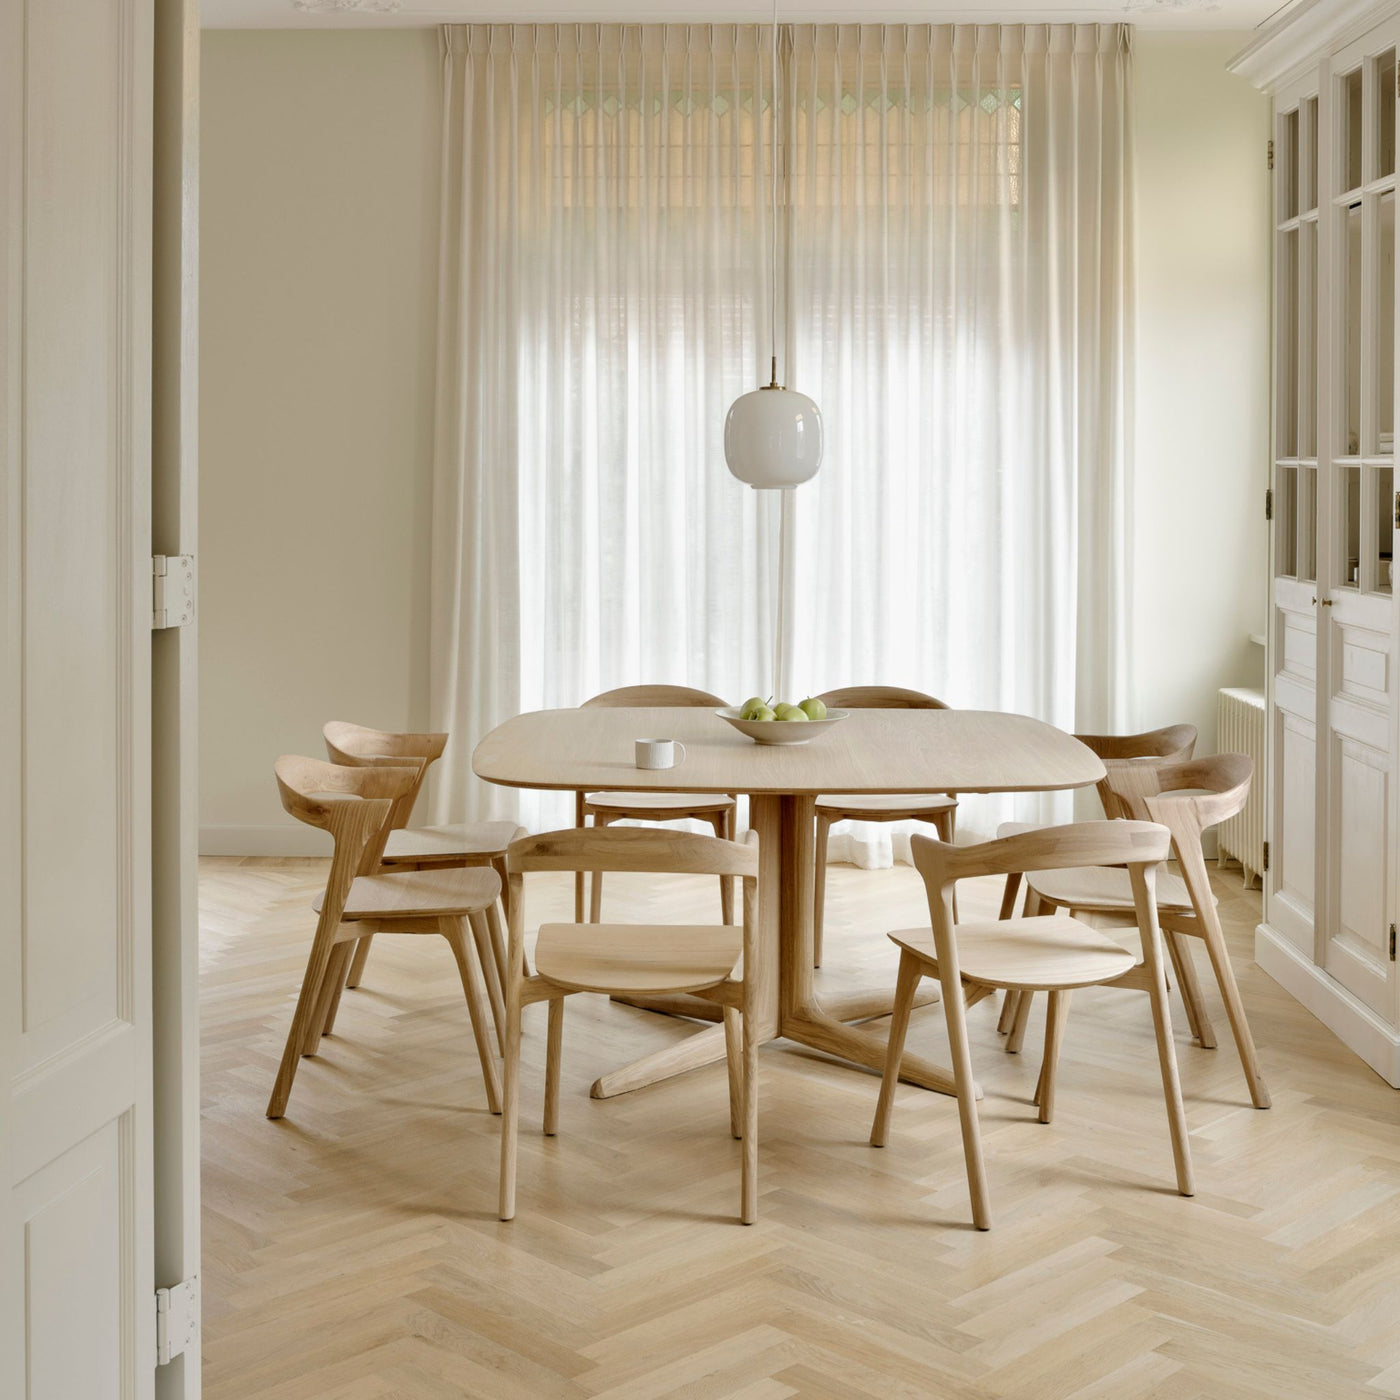 Ethnicraft Corto Dining Table and Bok Chairs in Dining Room with Herringbone Floors and Louis Poulsen Pendant